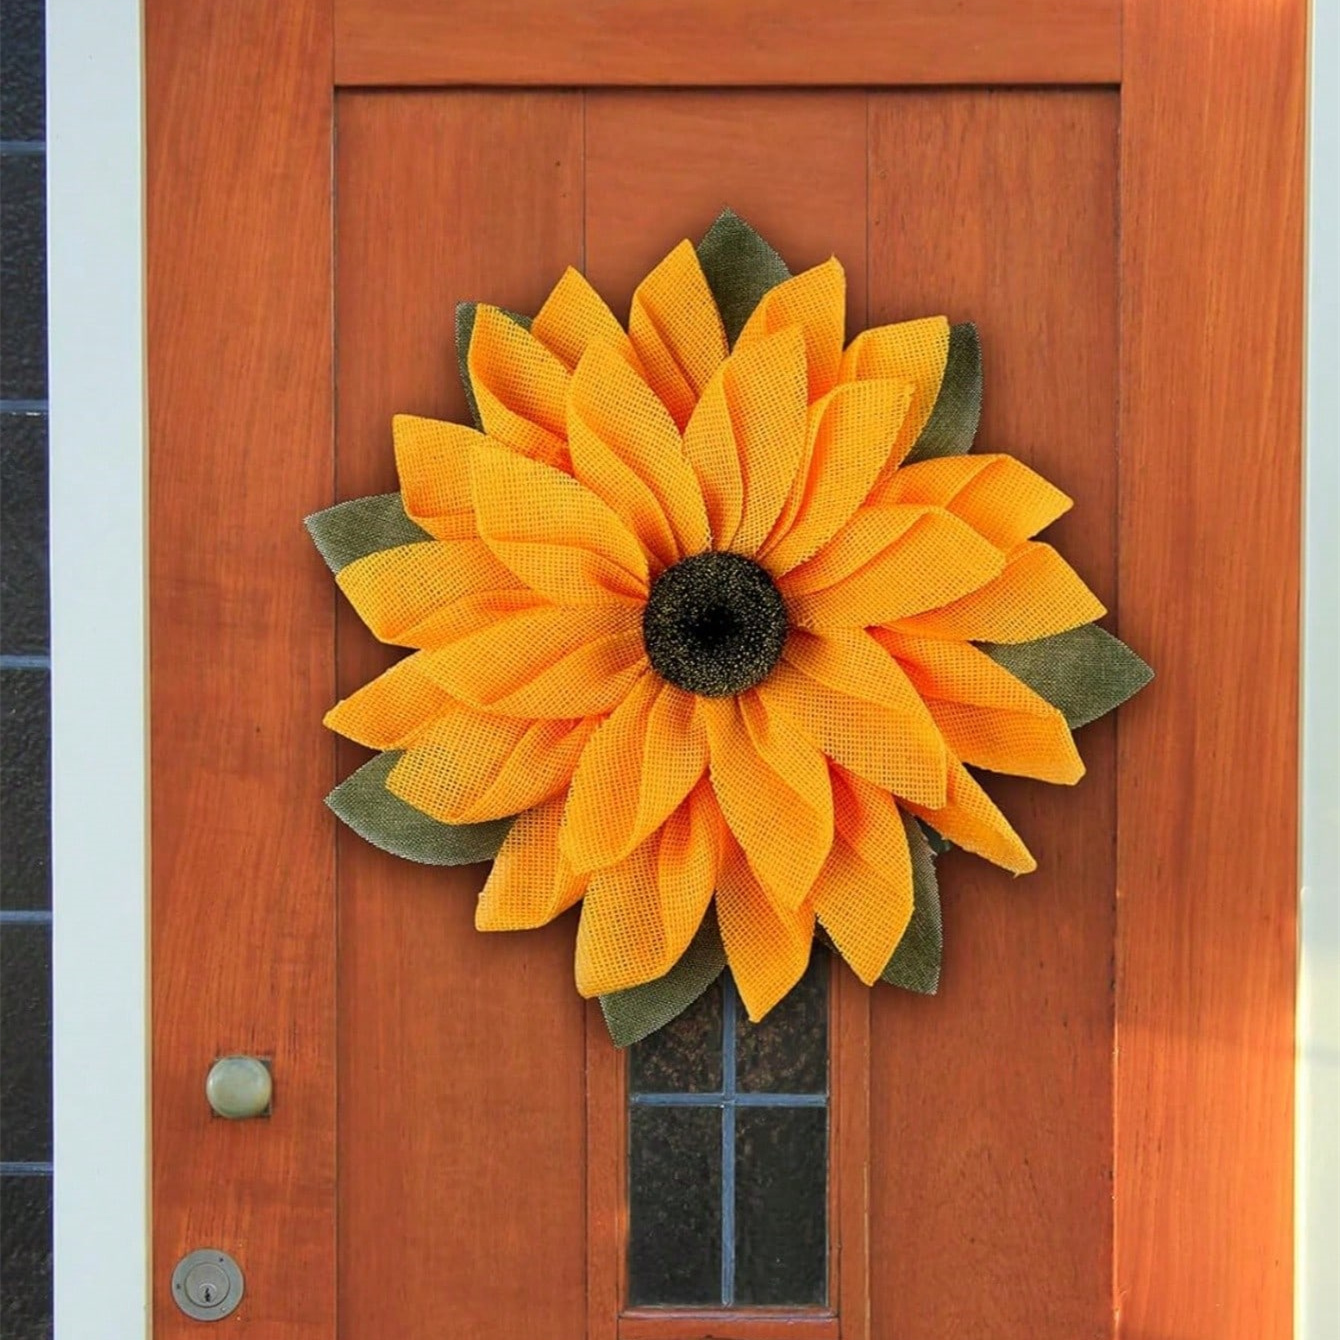 

2pcs 16 Inch Sunflower Wreath For Front Door Outside Sunflower Wall Hanging Decor Artificial Burlap Wreath With Yellow Sunflower For Rustic Garland Bee Festival Welcome Sign Decorations